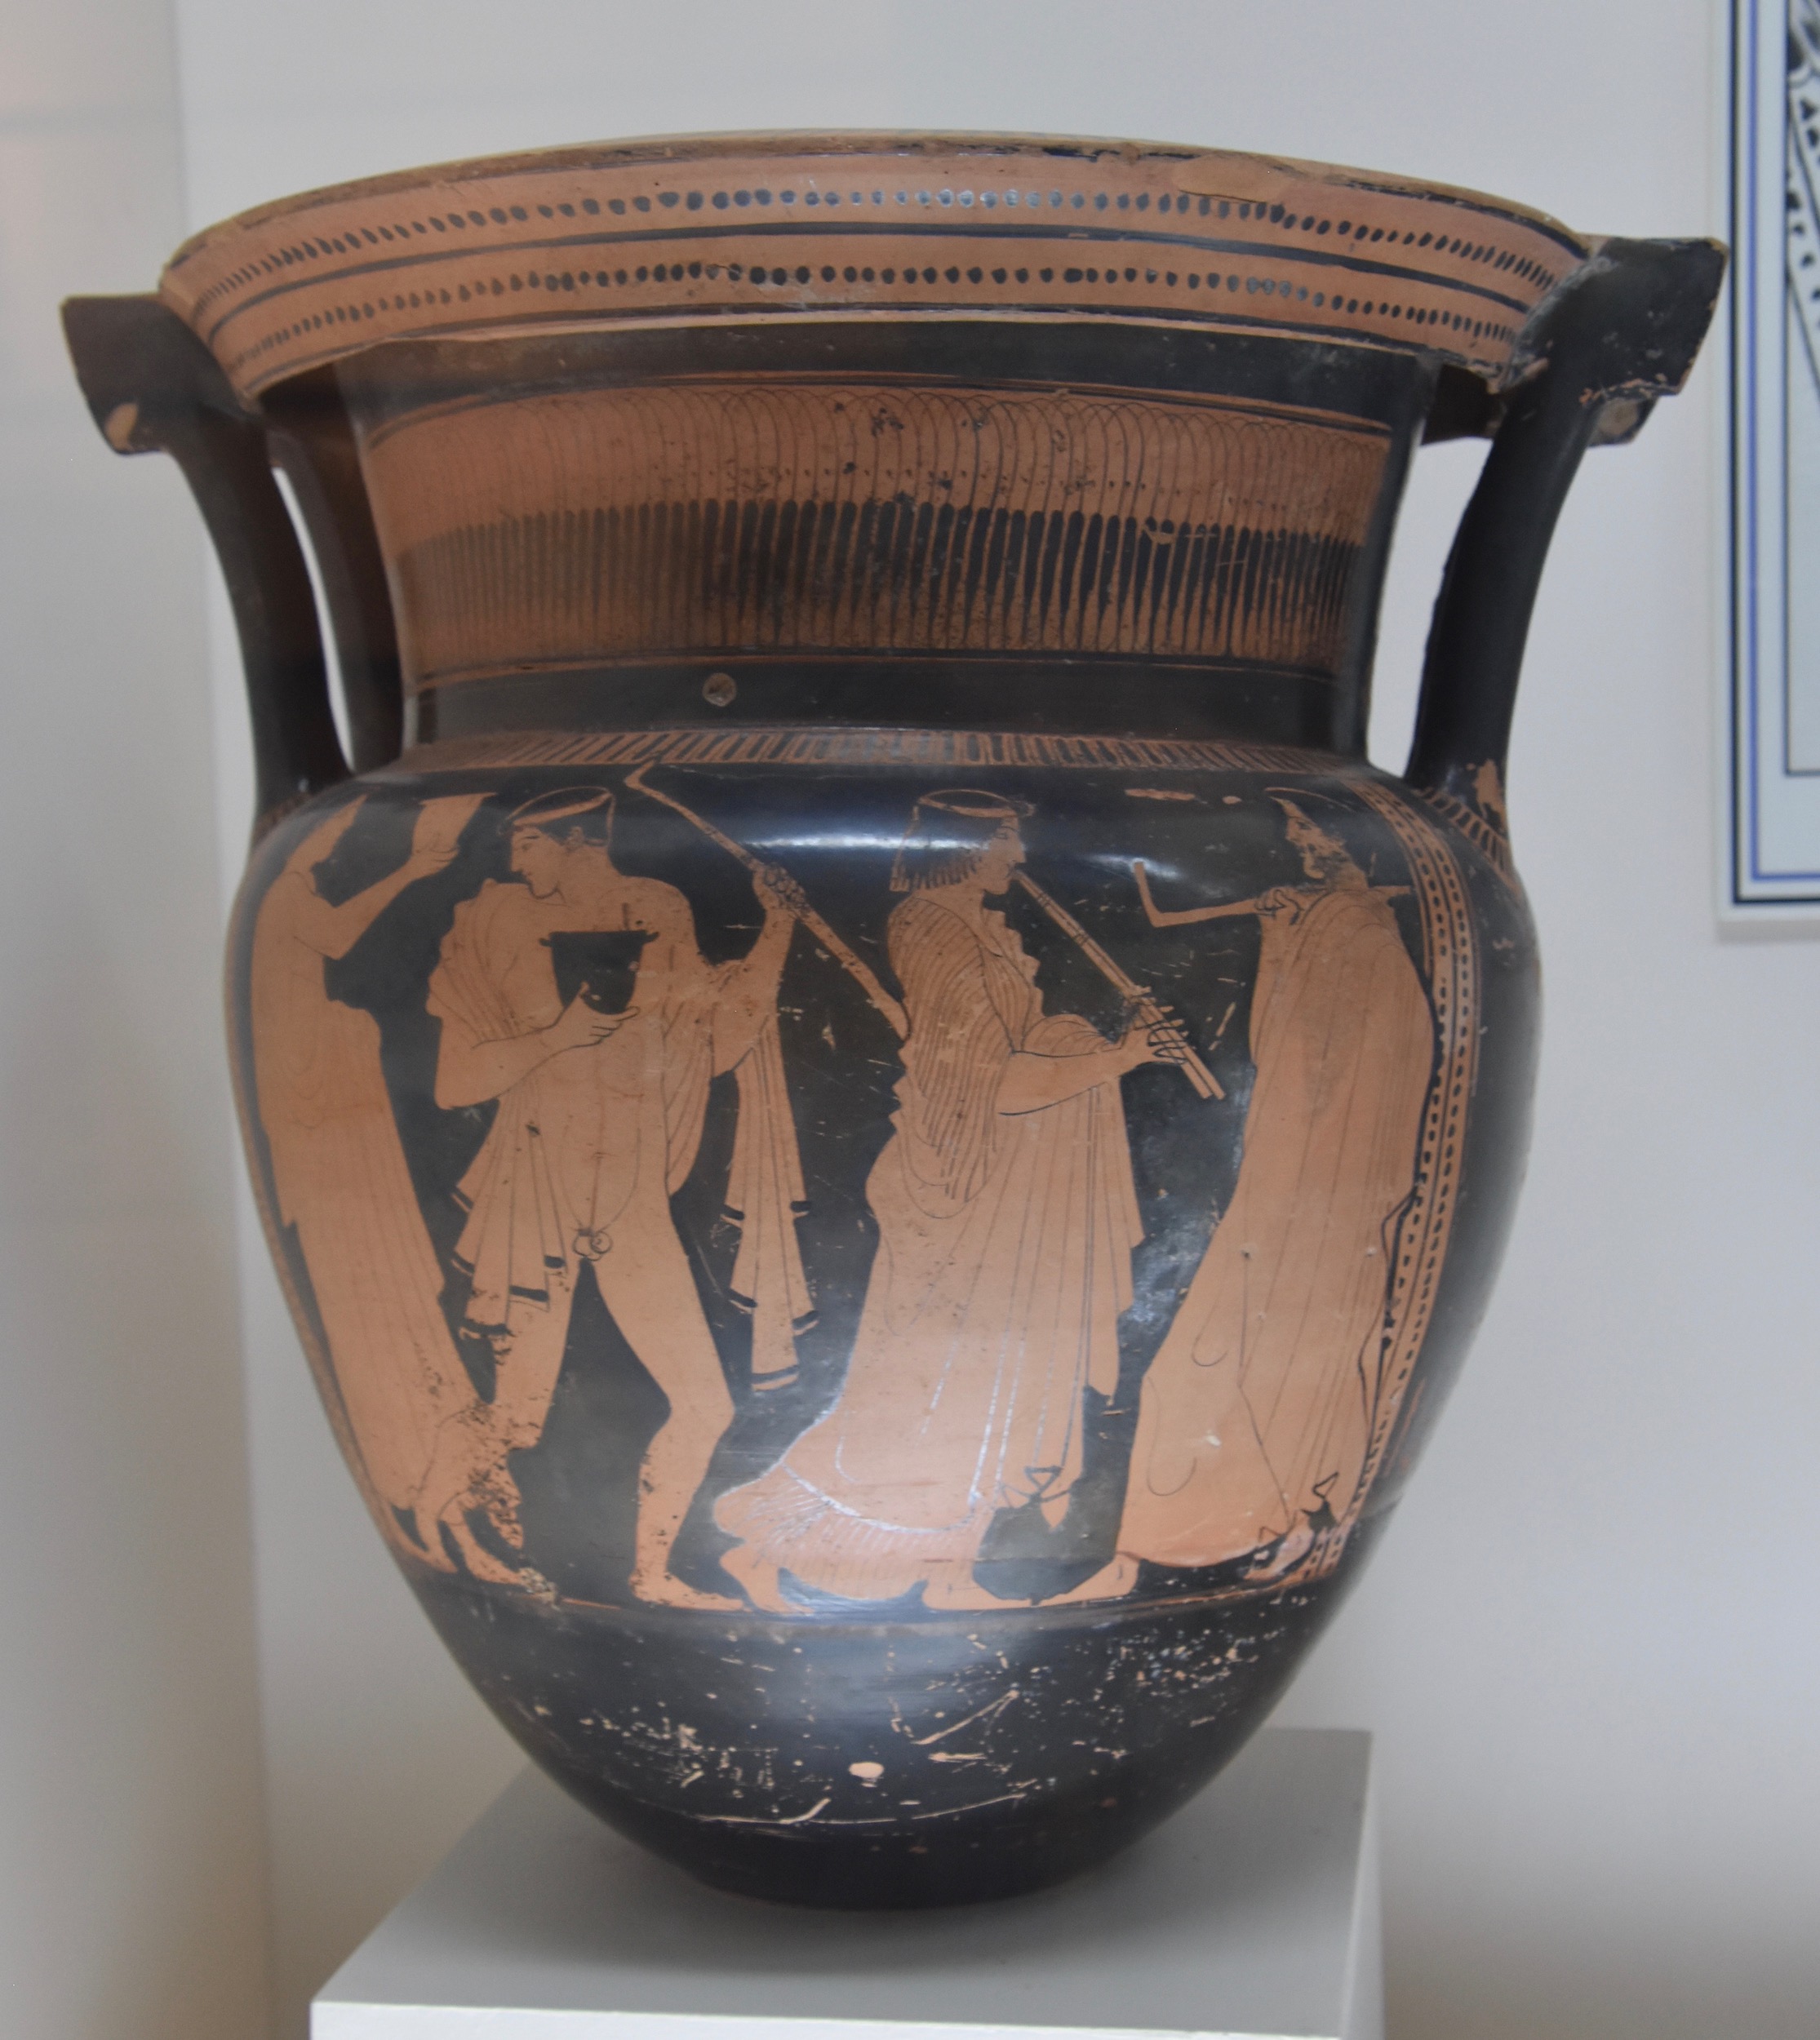 Classic Age Krater, Antalya Archaeological Museum